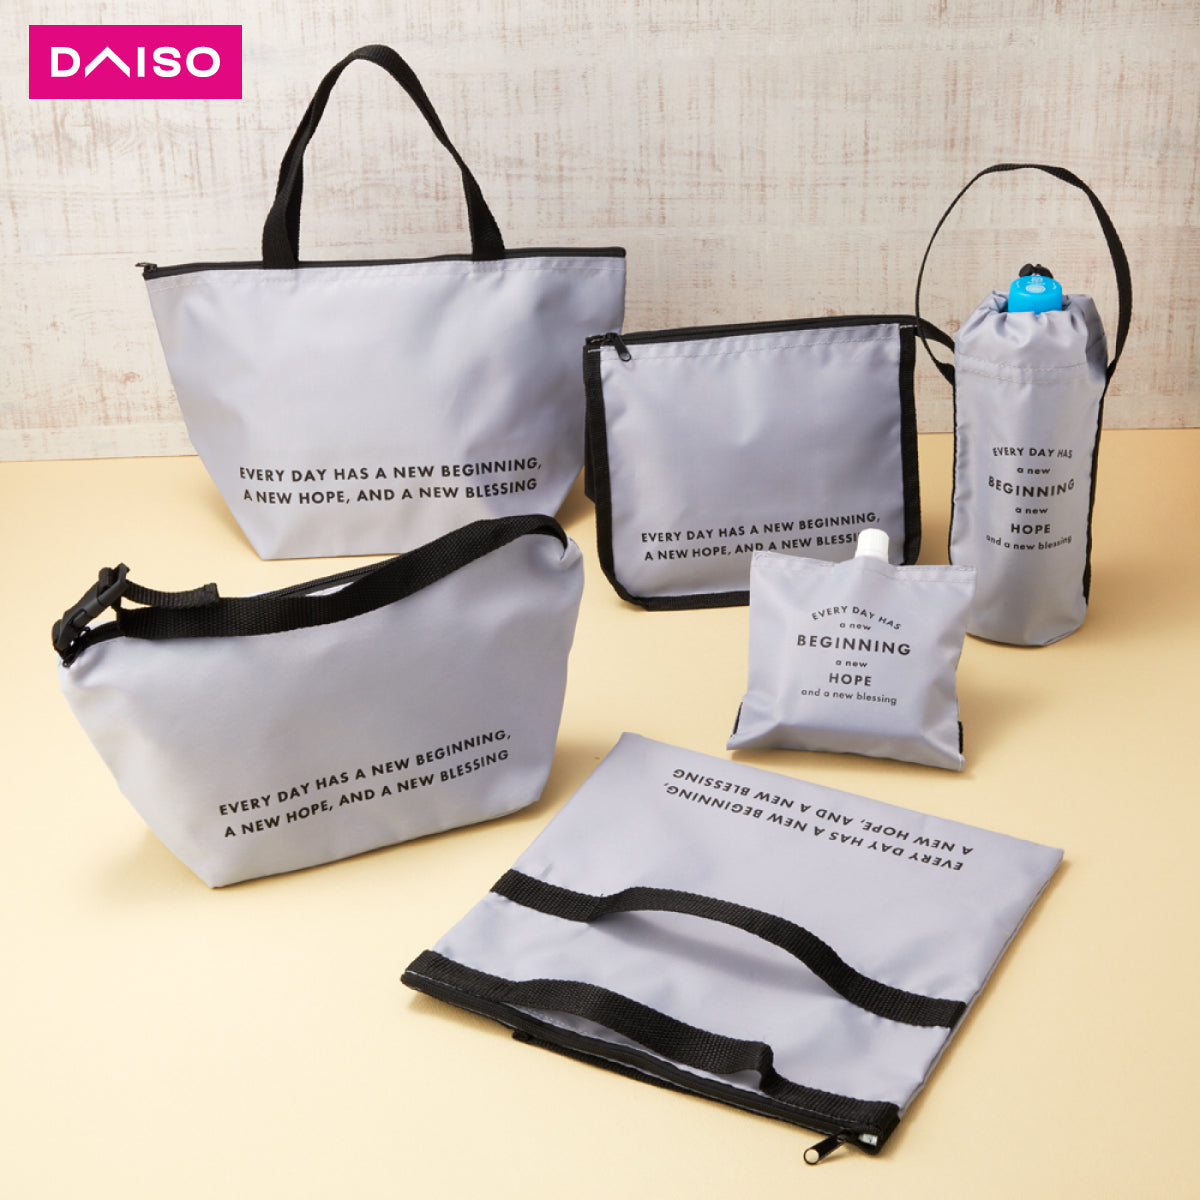 Daiso Mini Pink Tote Bag (Synthetic Leather)